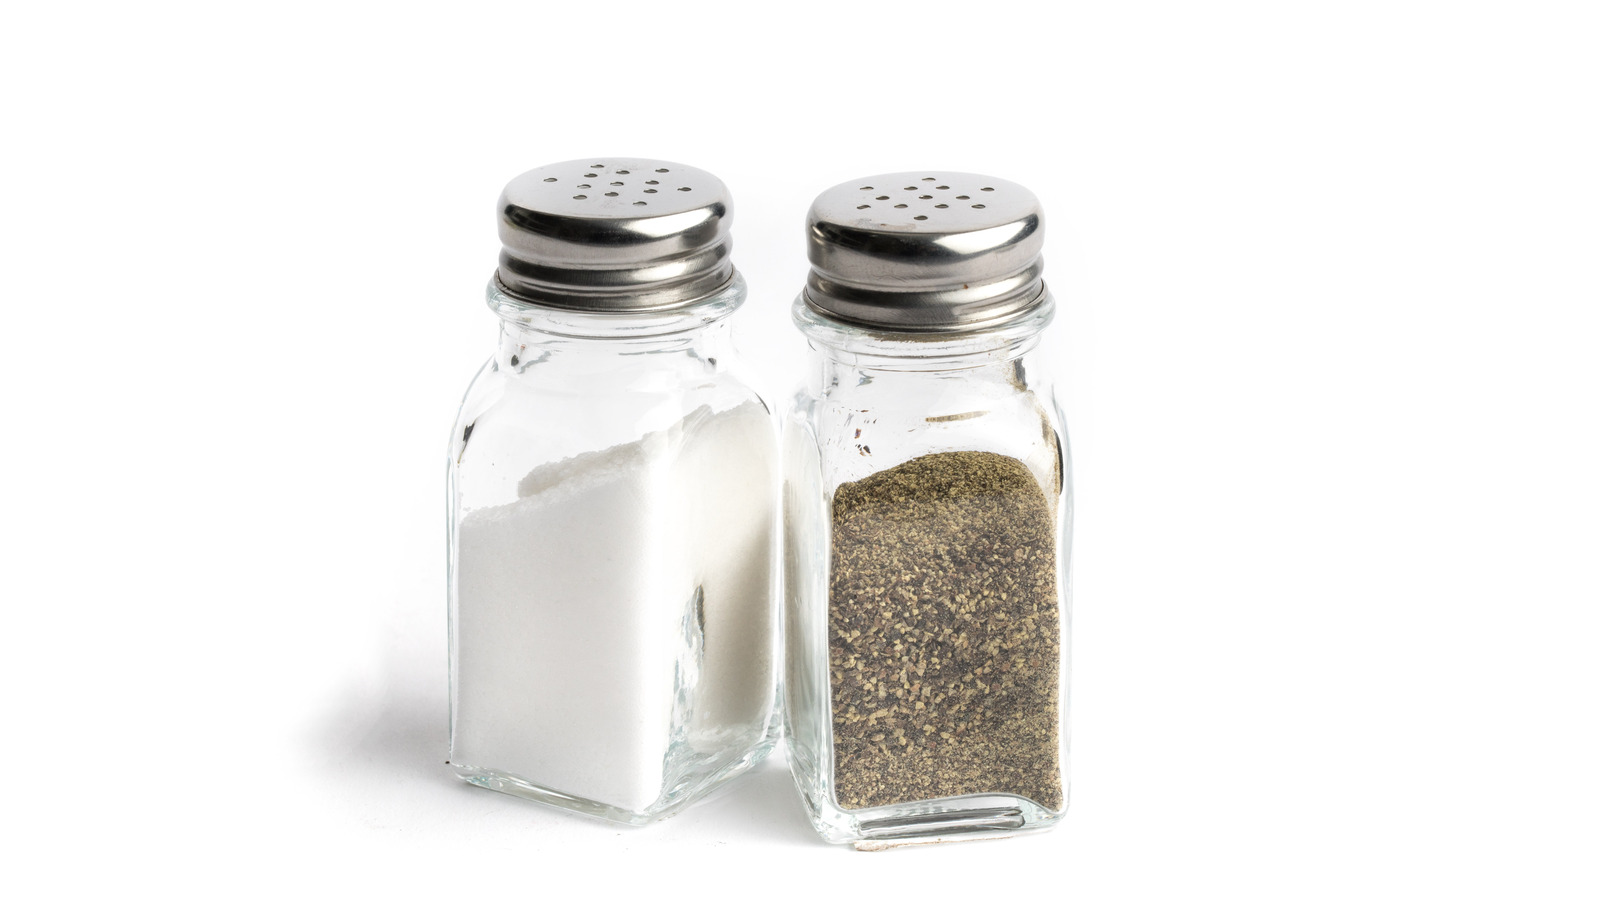 https://www.tastingtable.com/img/gallery/the-intriguing-history-of-salt-and-pepper-shakers/l-intro-1651076874.jpg